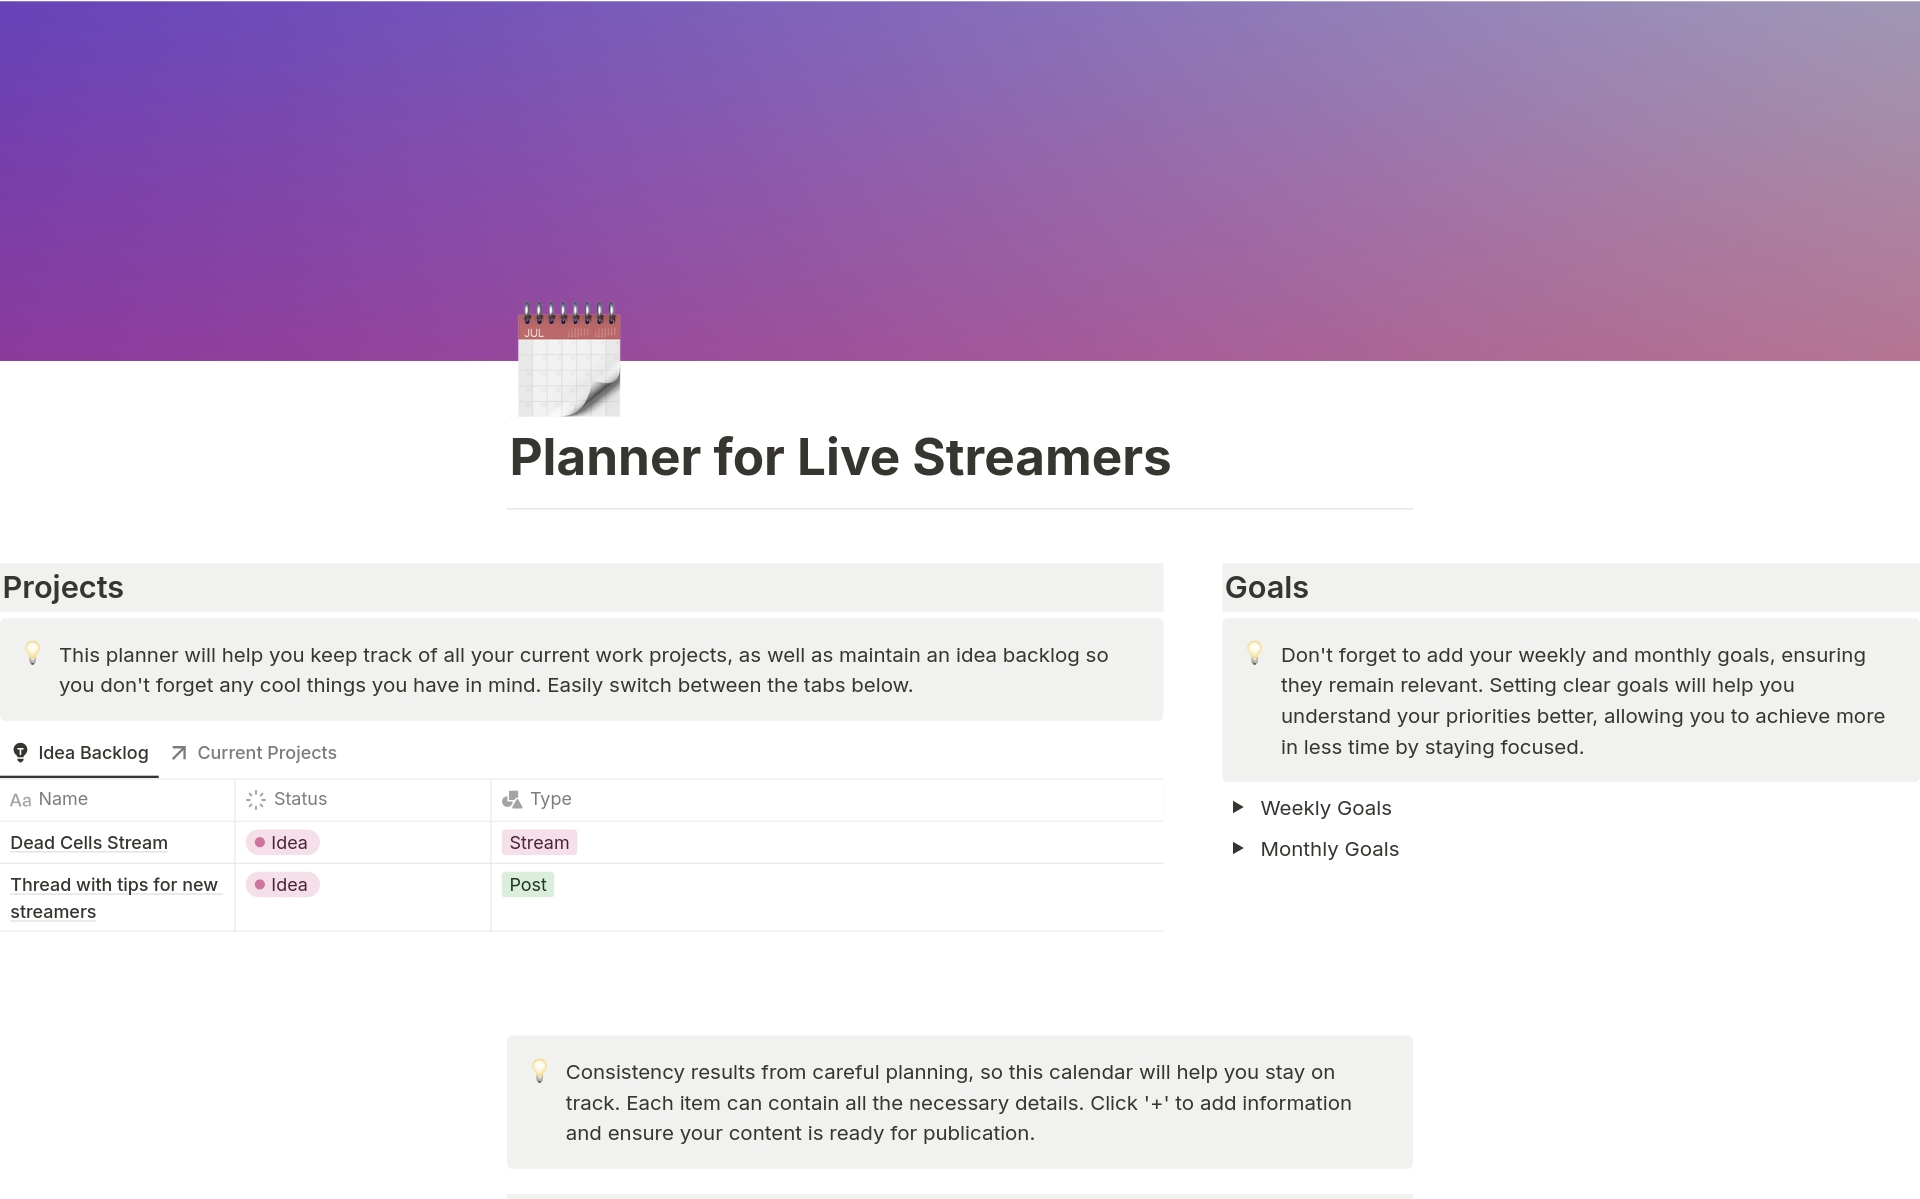 Discover our easy-to-use planner, tailored for live streamers and content creators. It combines project tracking, idea backlog, and monthly/weekly goals with a comprehensive content planner. Streamline your workflow effortlessly with this all-in-one template.